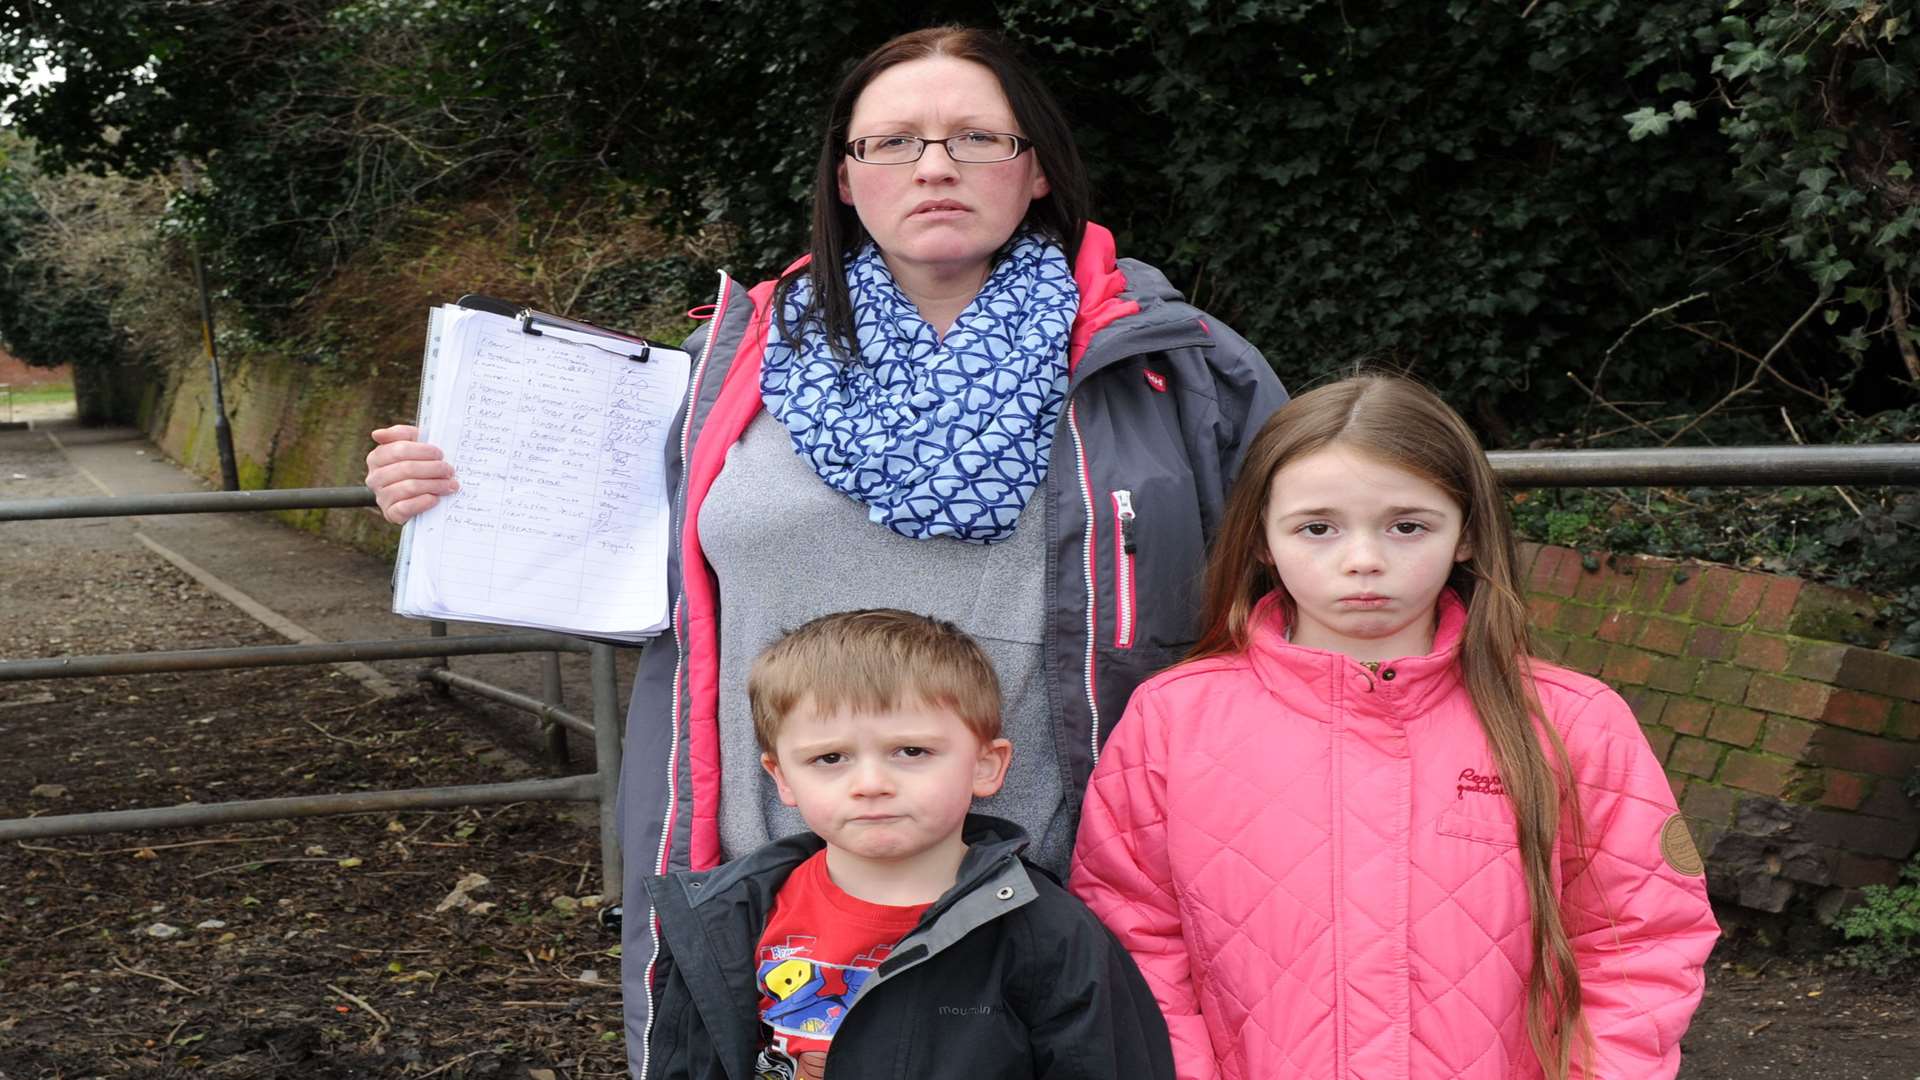 Kerry Capes is campaigning for a footpath to be installed for mums and children making their way from the Great Easthall estate to Lansdowne Primary School